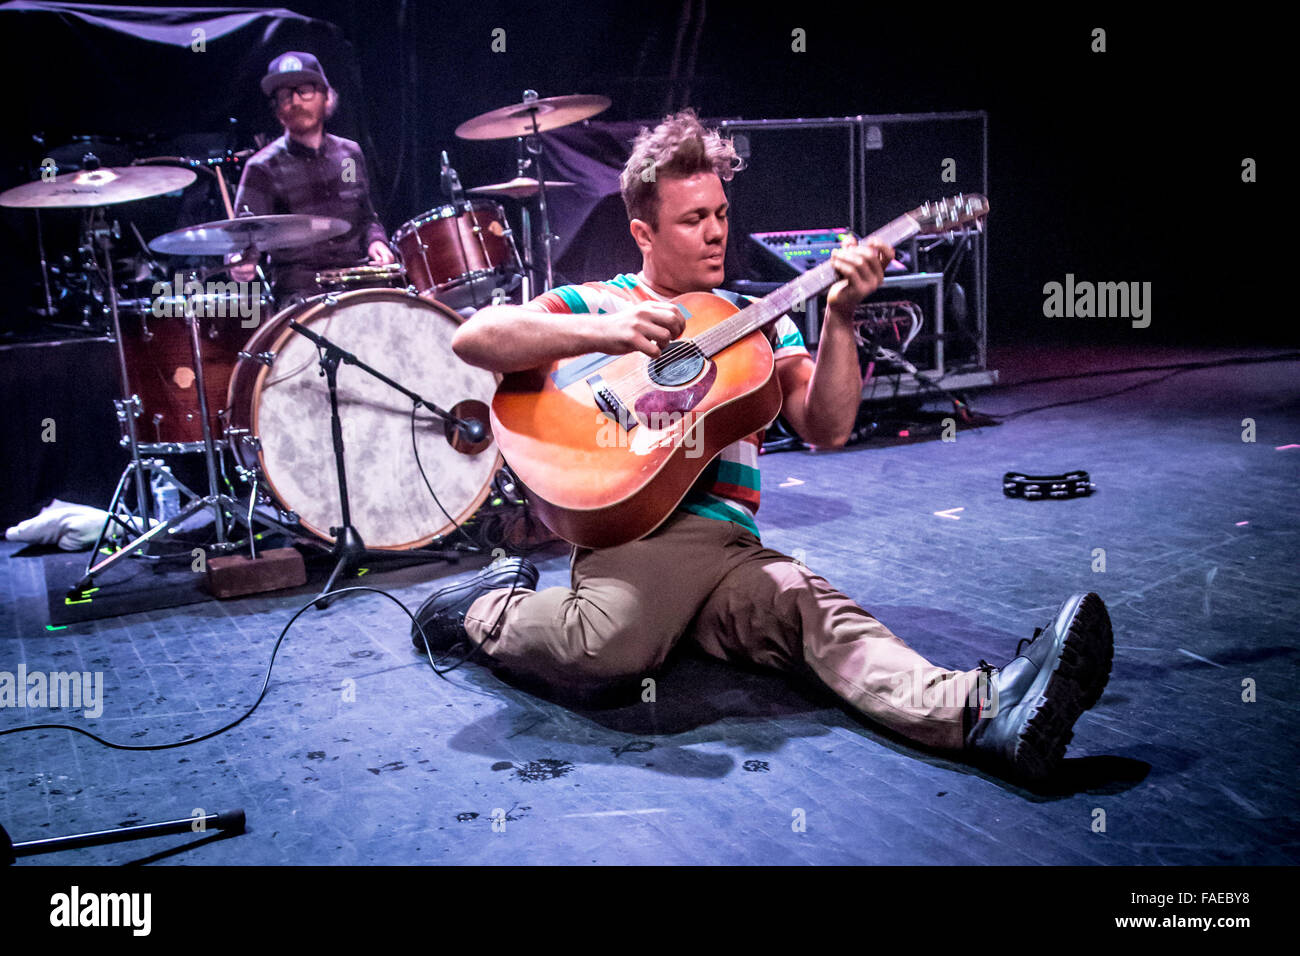 Dec. 19, 2015 - Detroit, Michigan, U.S - ASH BUCHHOLZ  of USS (UBIQUITOUS SYNERGY SEEKER) performing on The Night 89X Stole Xmas Show at The Fillmore in Detroit, MI on December 19th 2015 (Credit Image: © Marc Nader via ZUMA Wire) Stock Photo